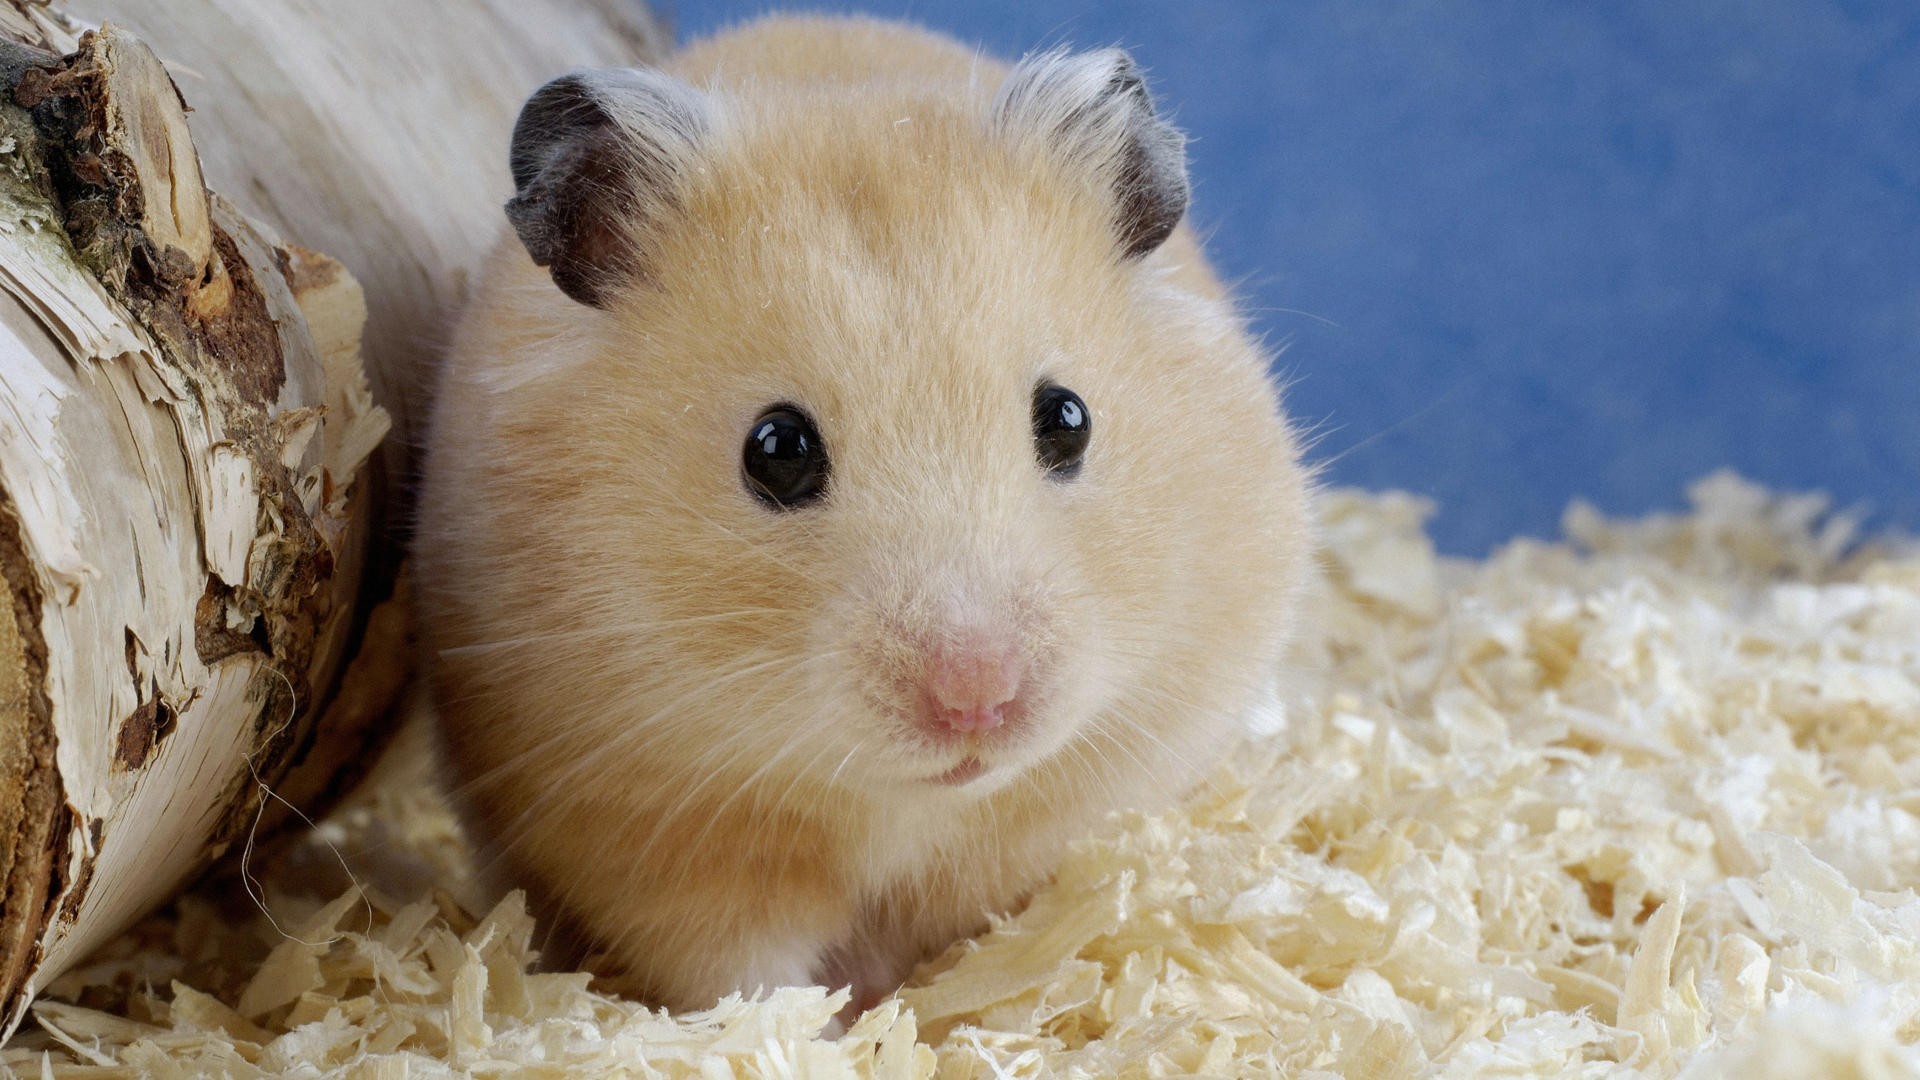 A golden hamster next to a log, with flaky bedding beneath it.